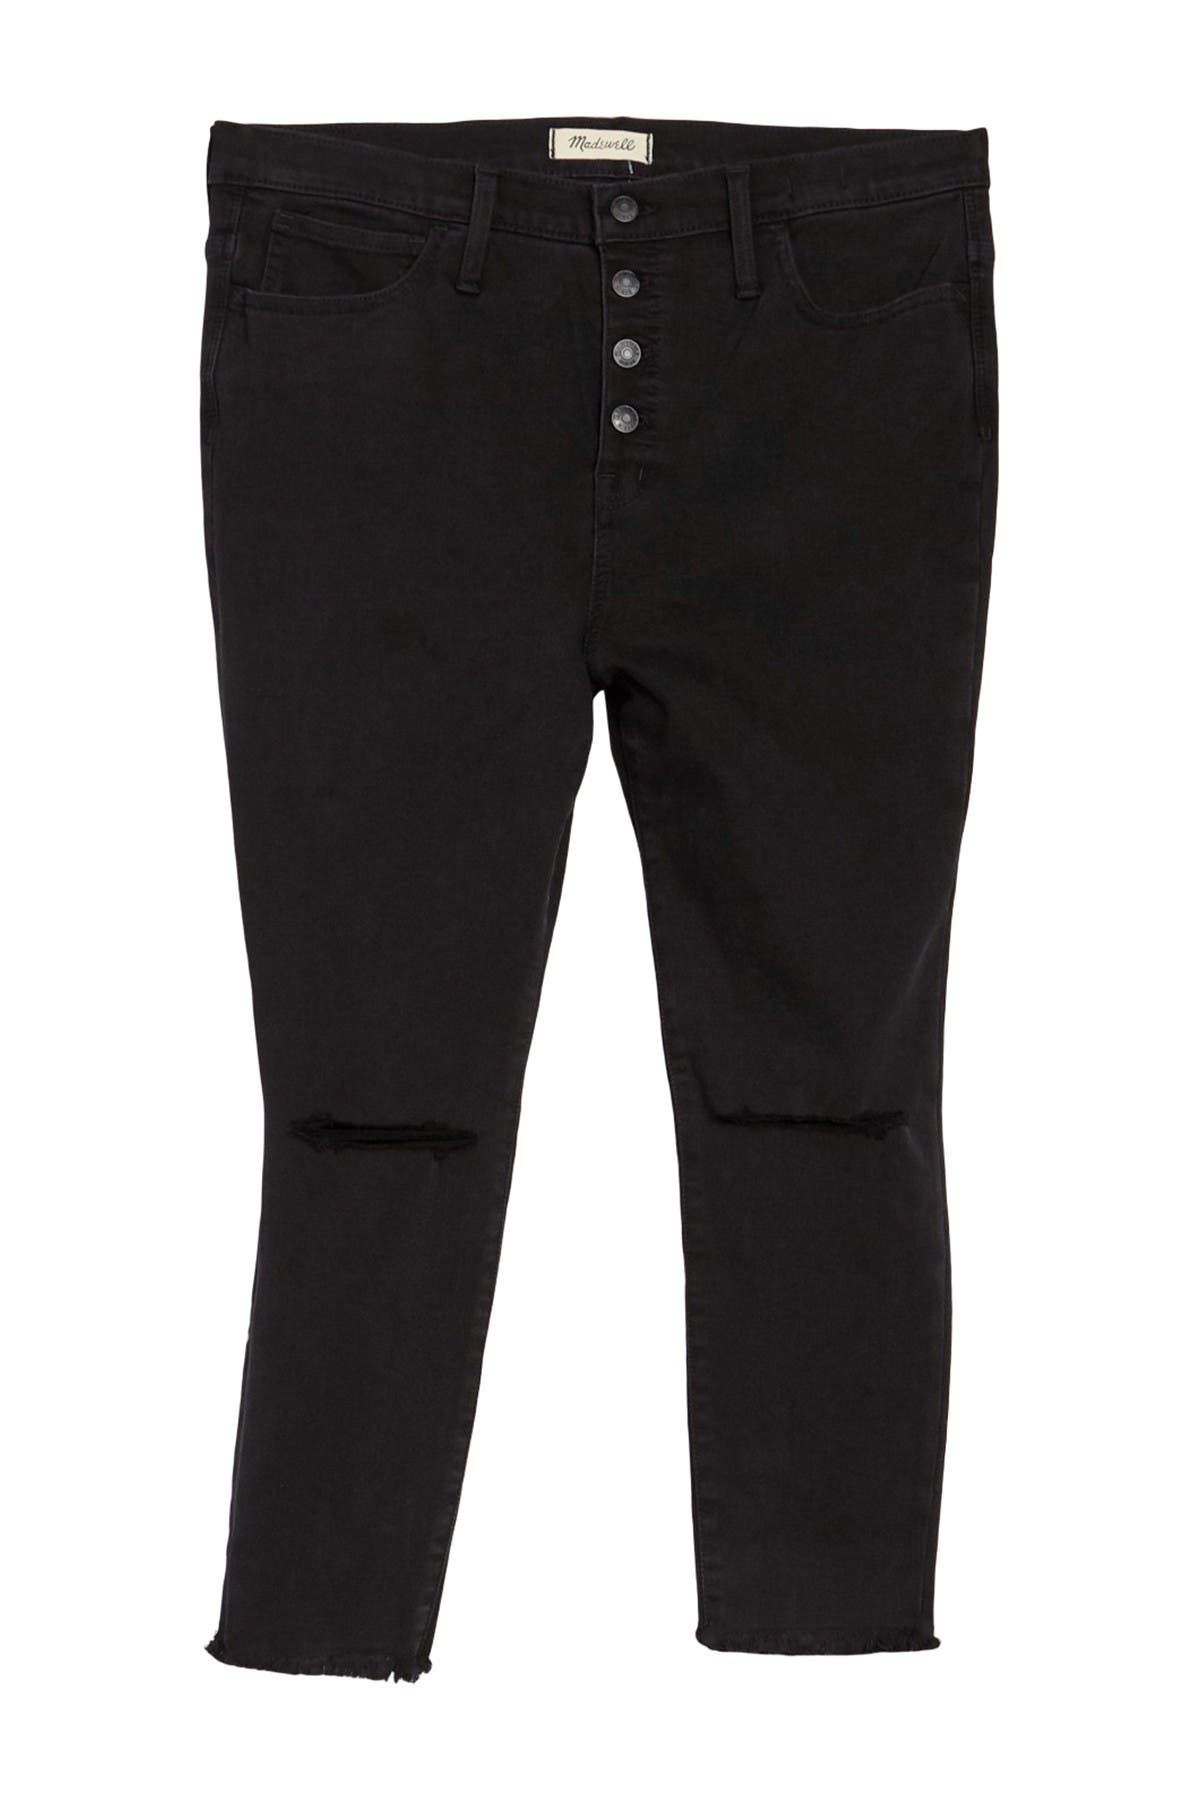 nordstrom madewell black jeans